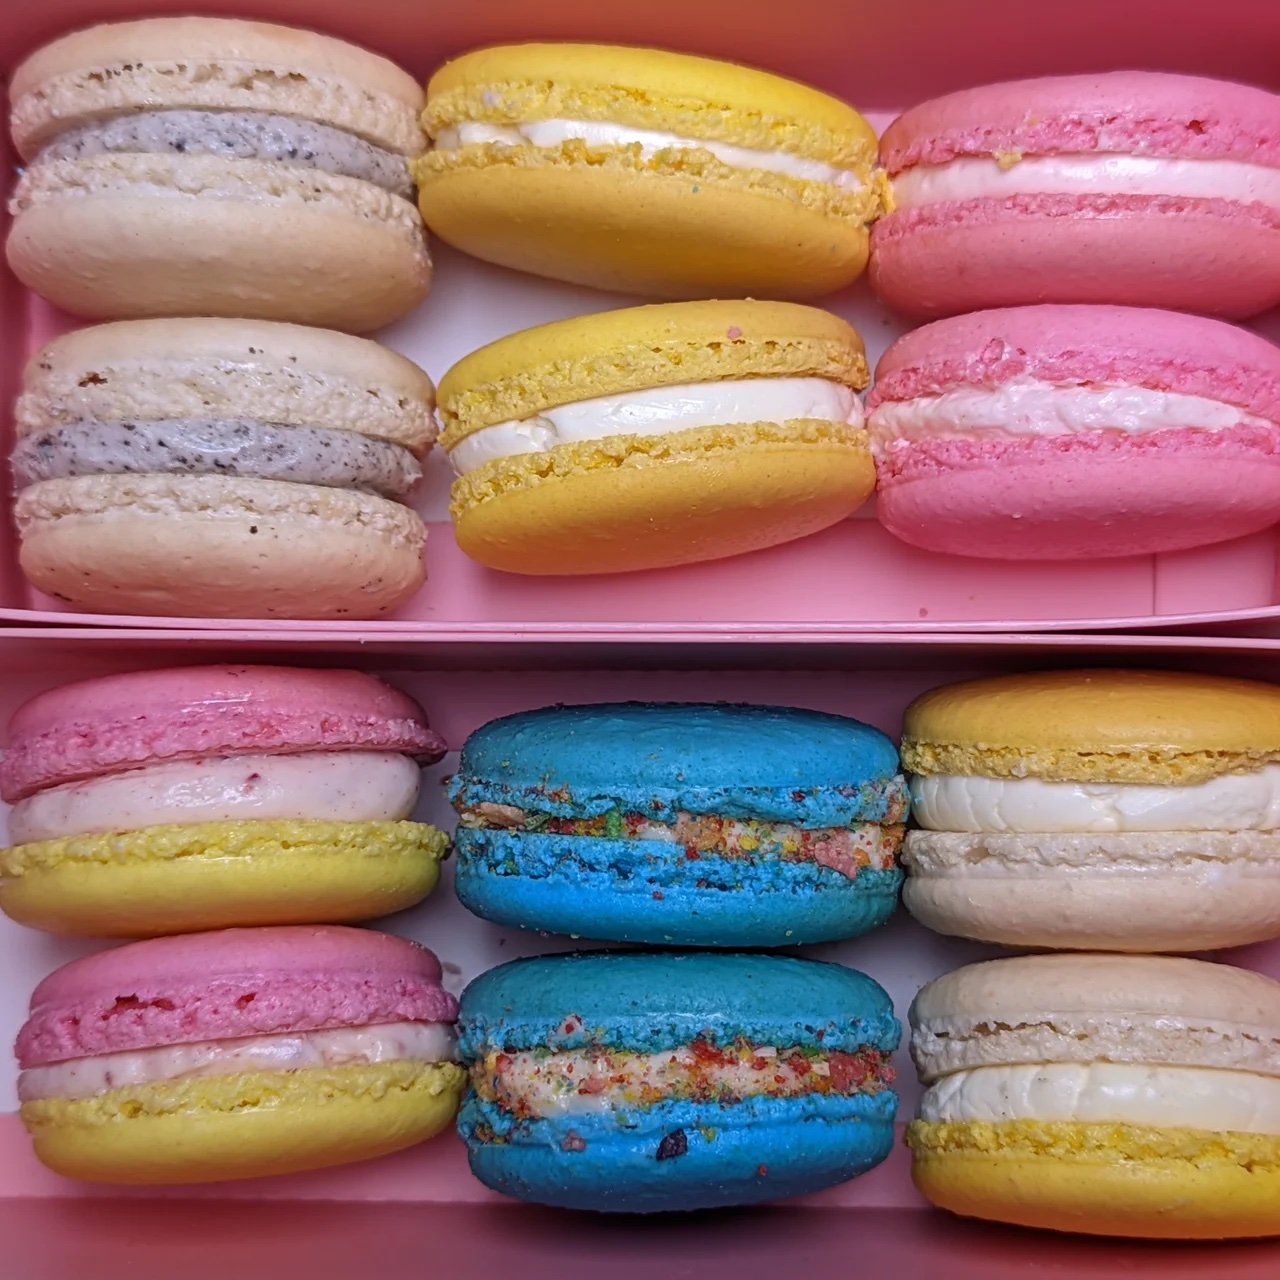 A box of colorful macarons.